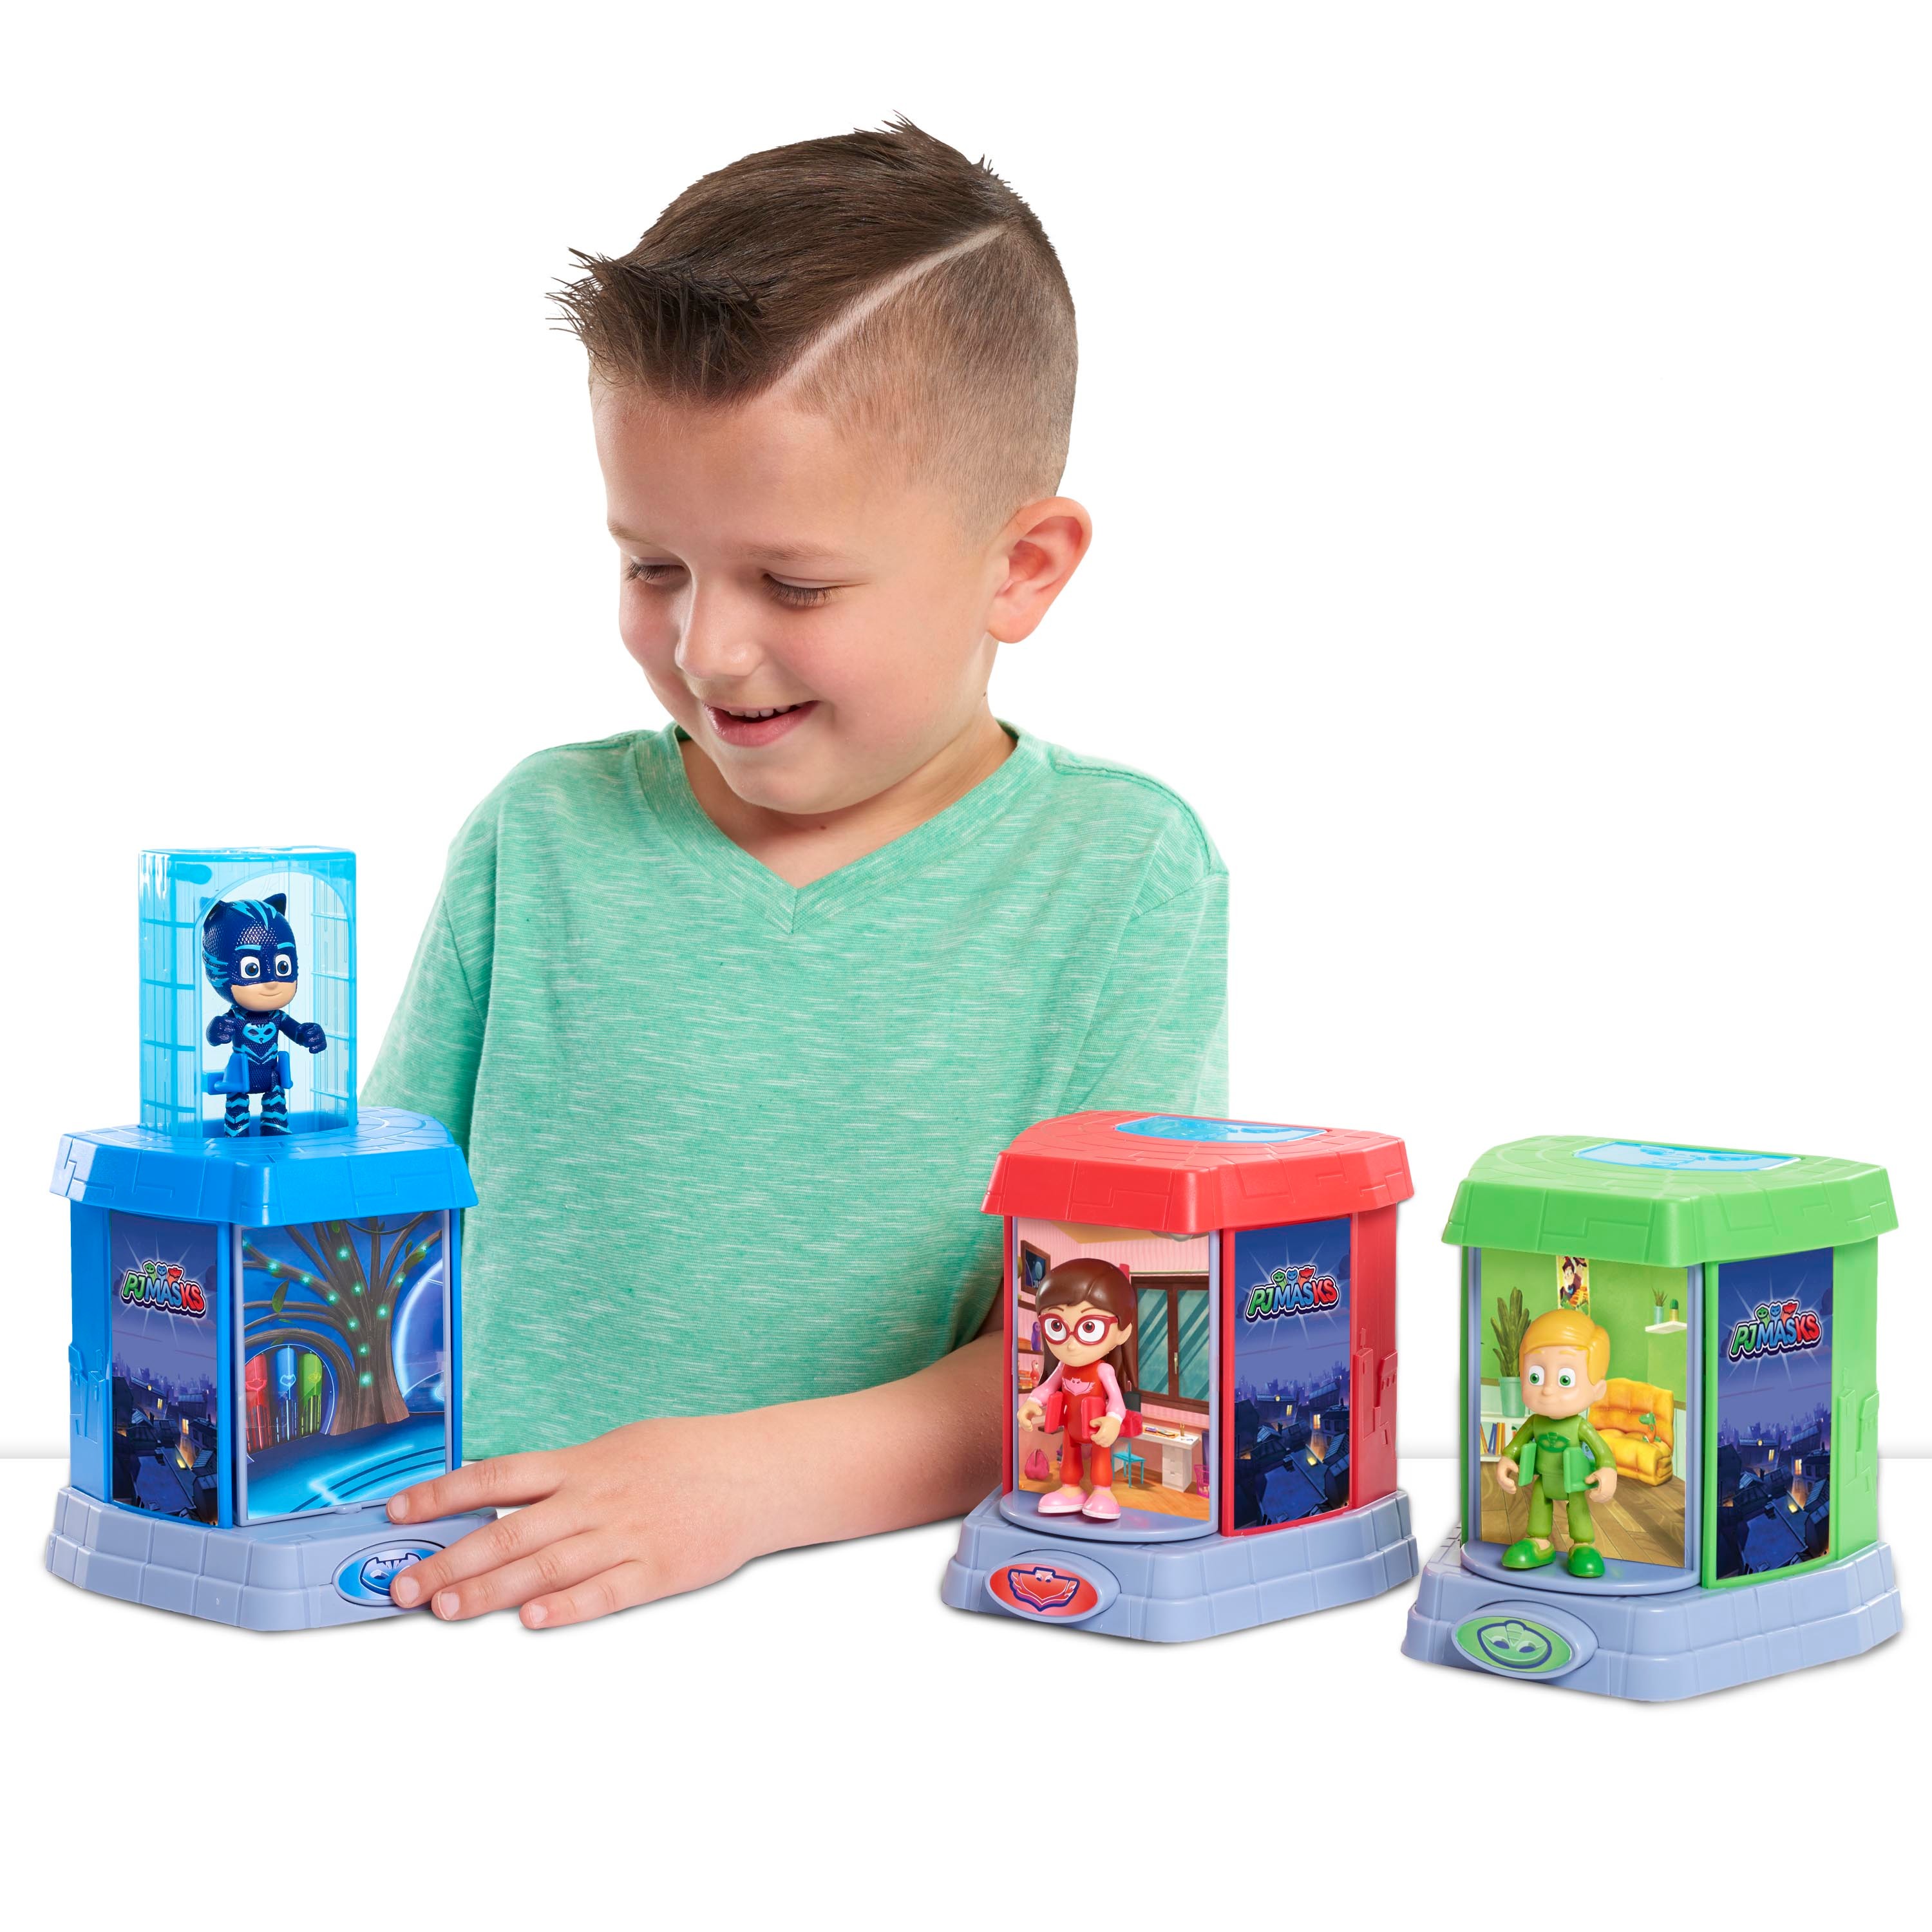 PJ Masks Transforming Figures, Catboy,  Kids Toys for Ages 3 Up, Gifts and Presents - image 4 of 4